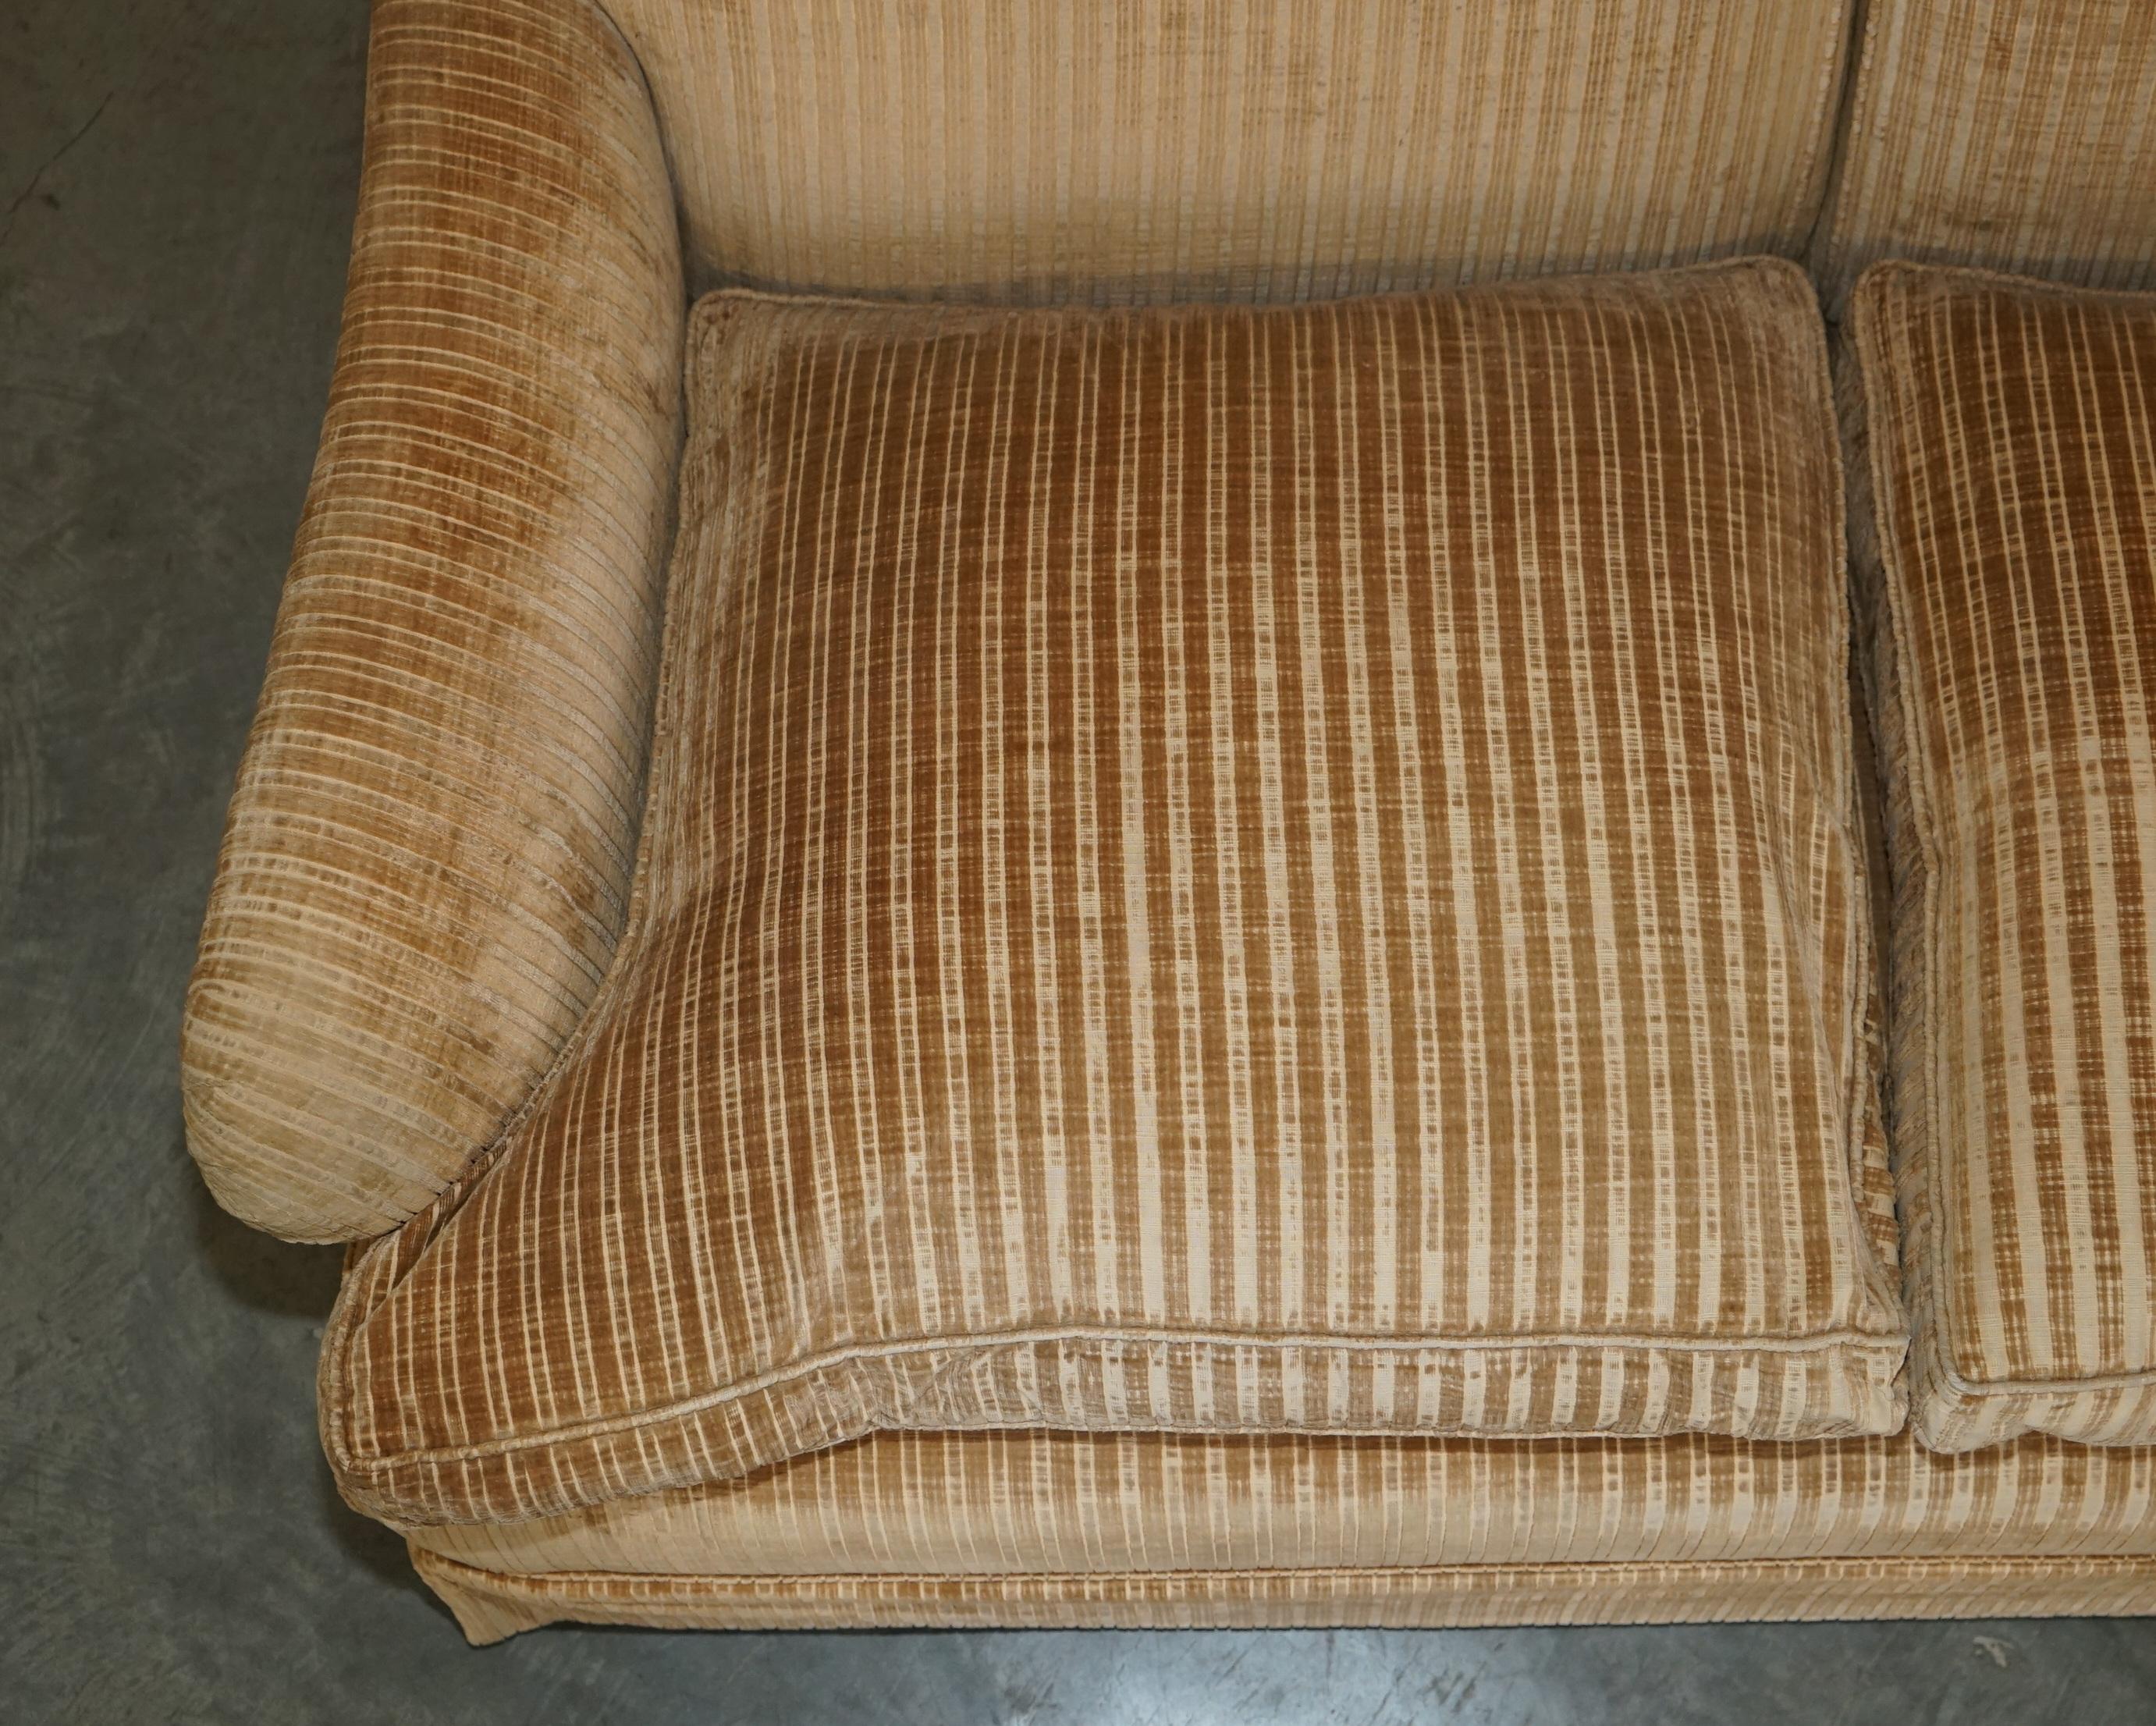 LOVELY HOWARD & SON'S / CHAIRS LTD ZWEI SEAT SOFA FEATHER FILLED SEAT CUSHIONs (20. Jahrhundert) im Angebot